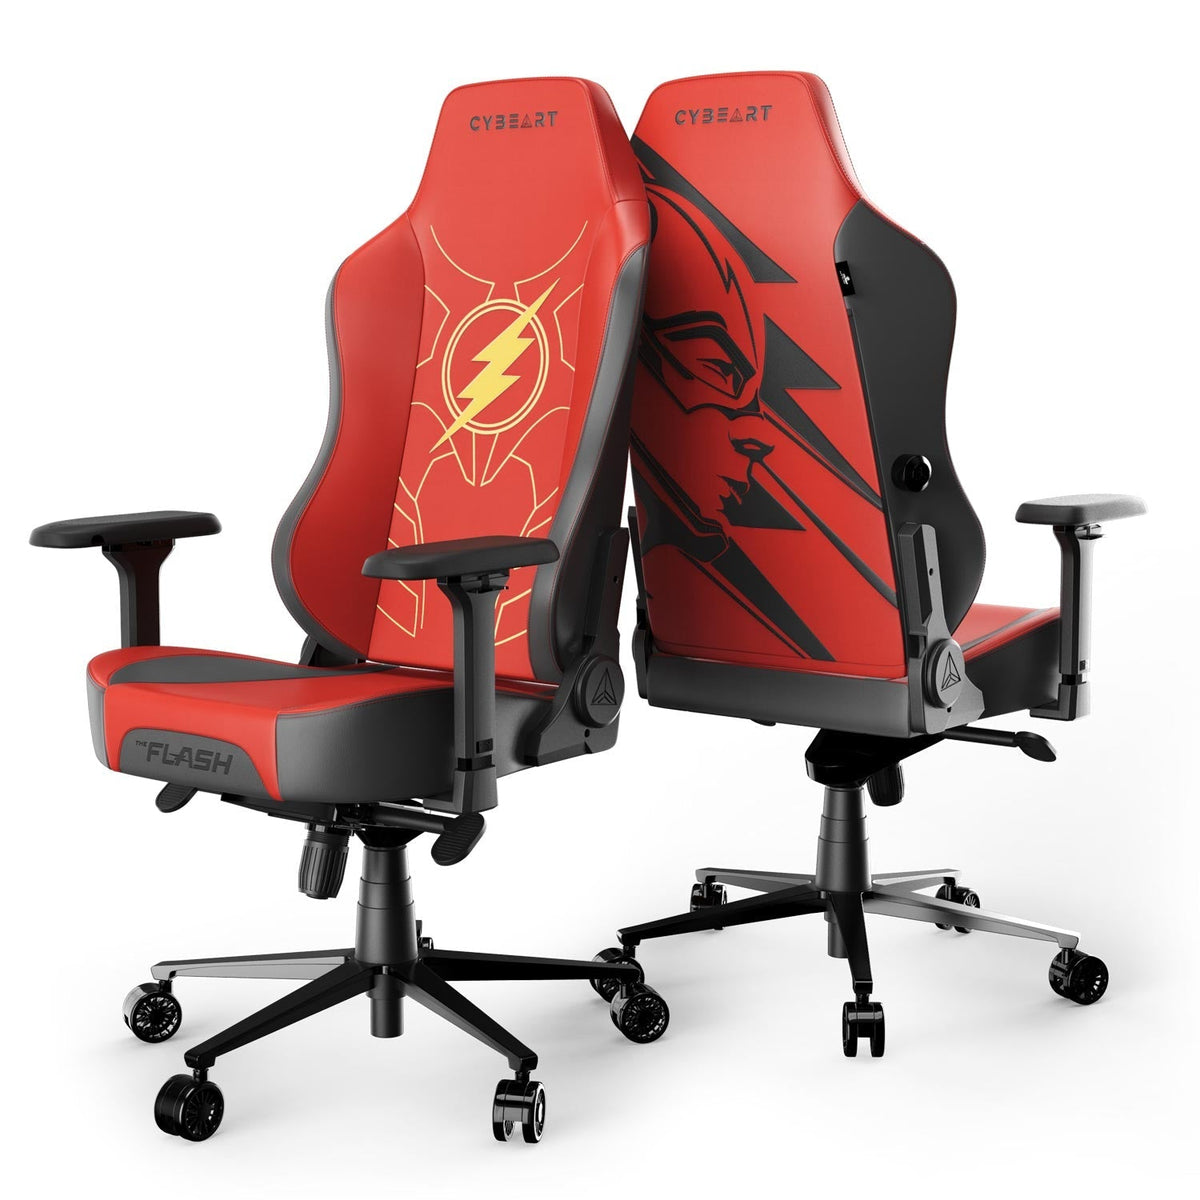 The Flash Gaming Chair | Flash Chairs | Cybeart